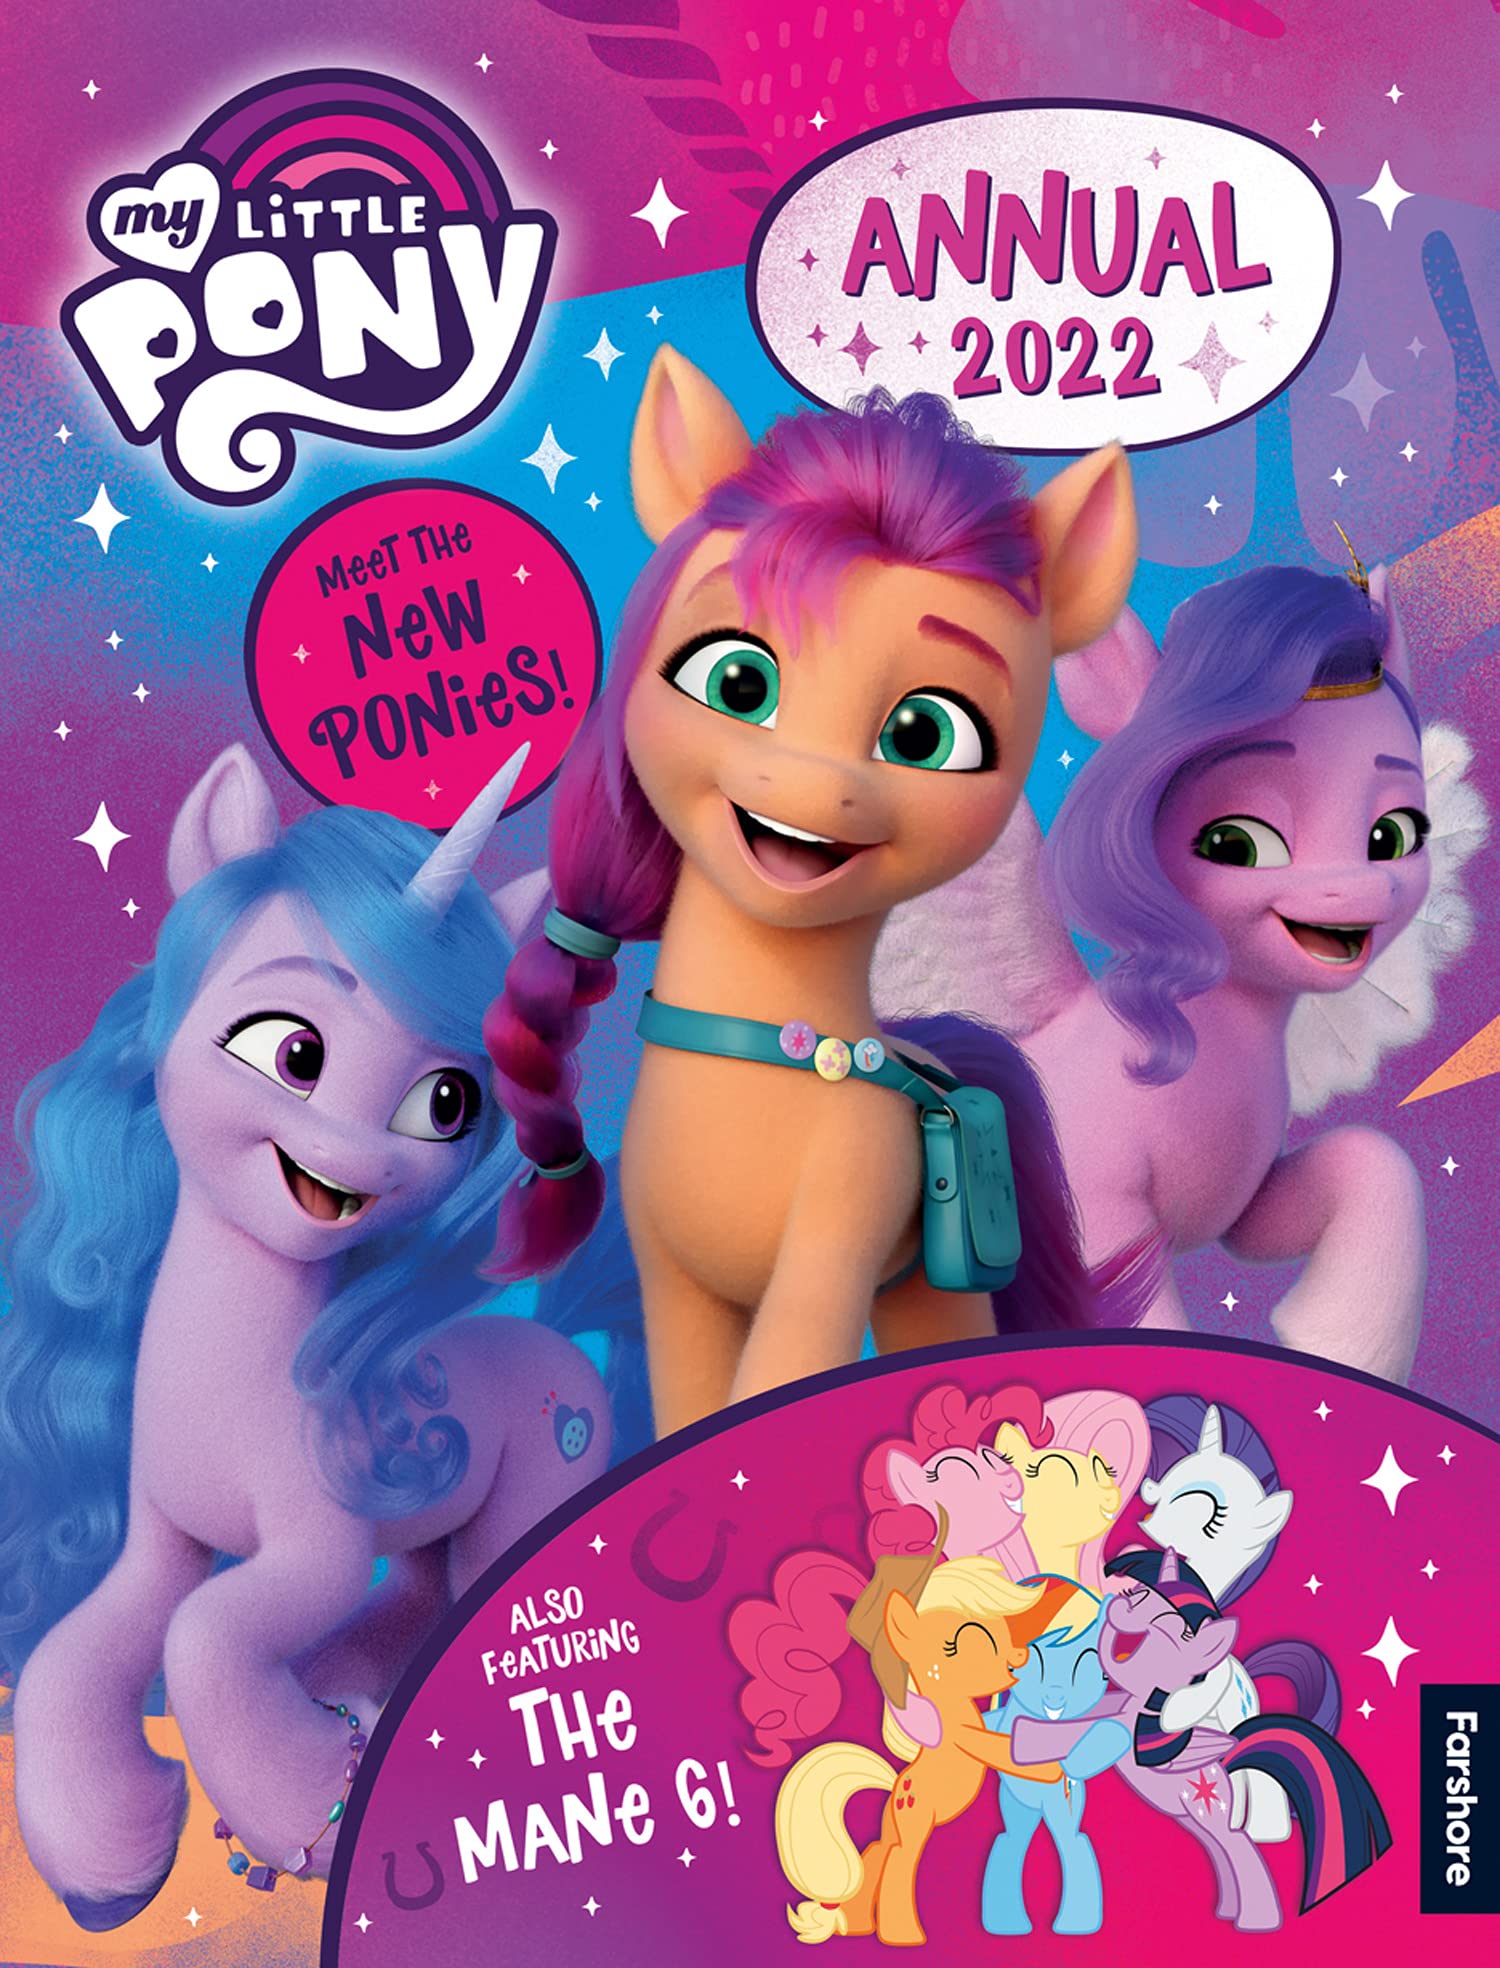 Equestria Daily Stuff!: My Little Pony Annual 2022 Reveals Image from the Generation 5 Movie!